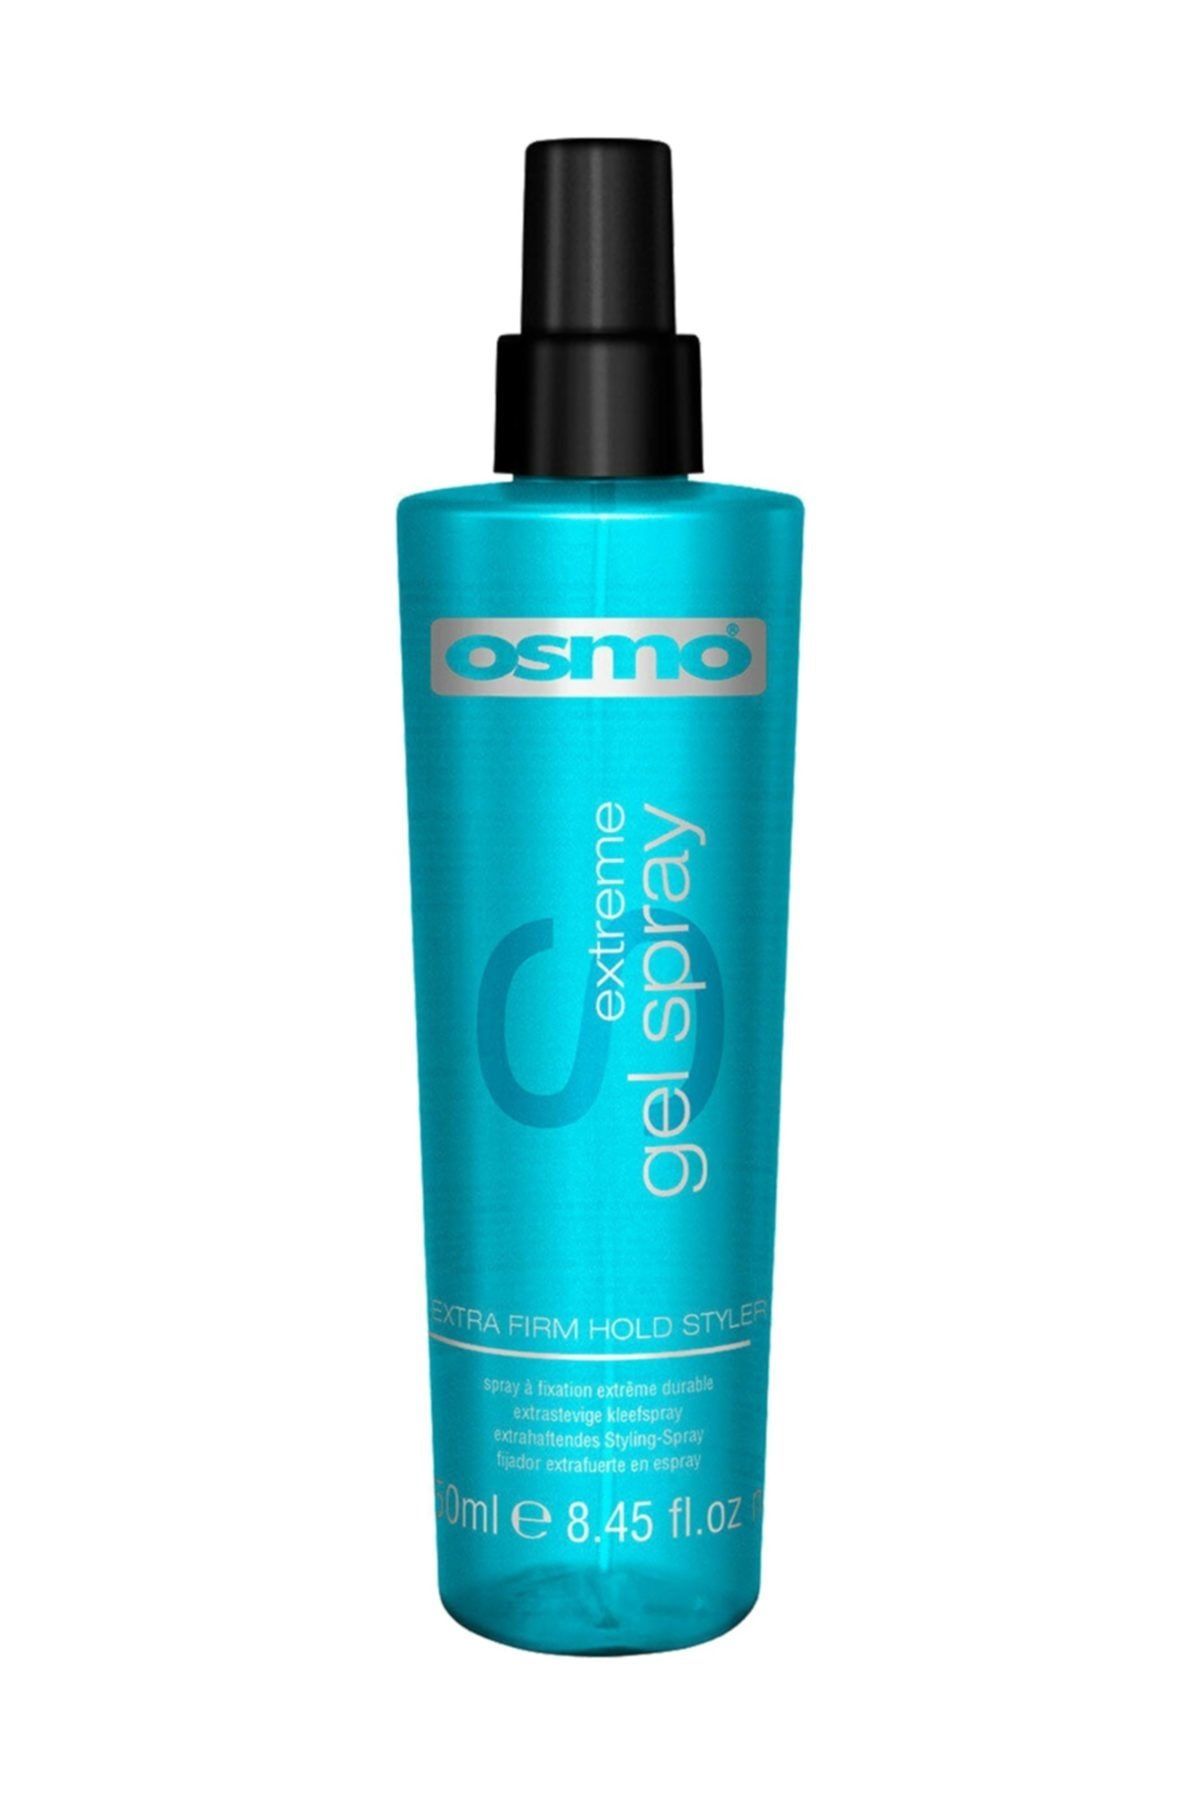 Osmo Extreme Extra Firm Hold Styler Gel Spray 250 ml.